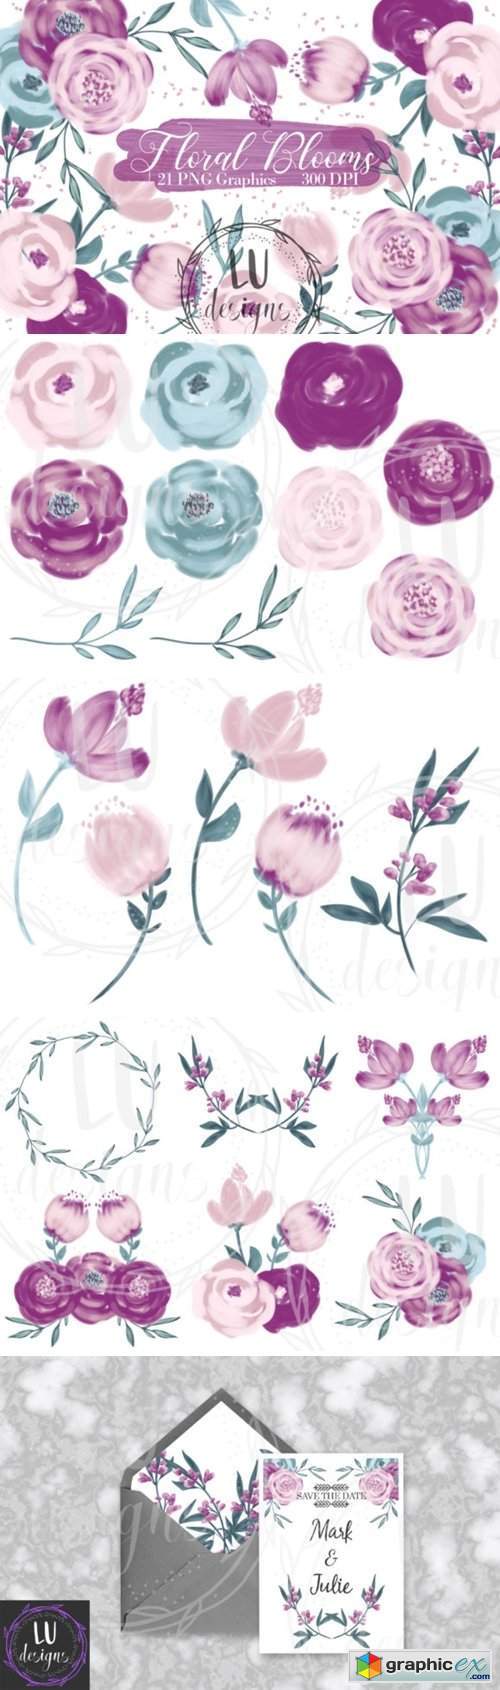 Flowers Clipart, Burgundy Floral Graphic